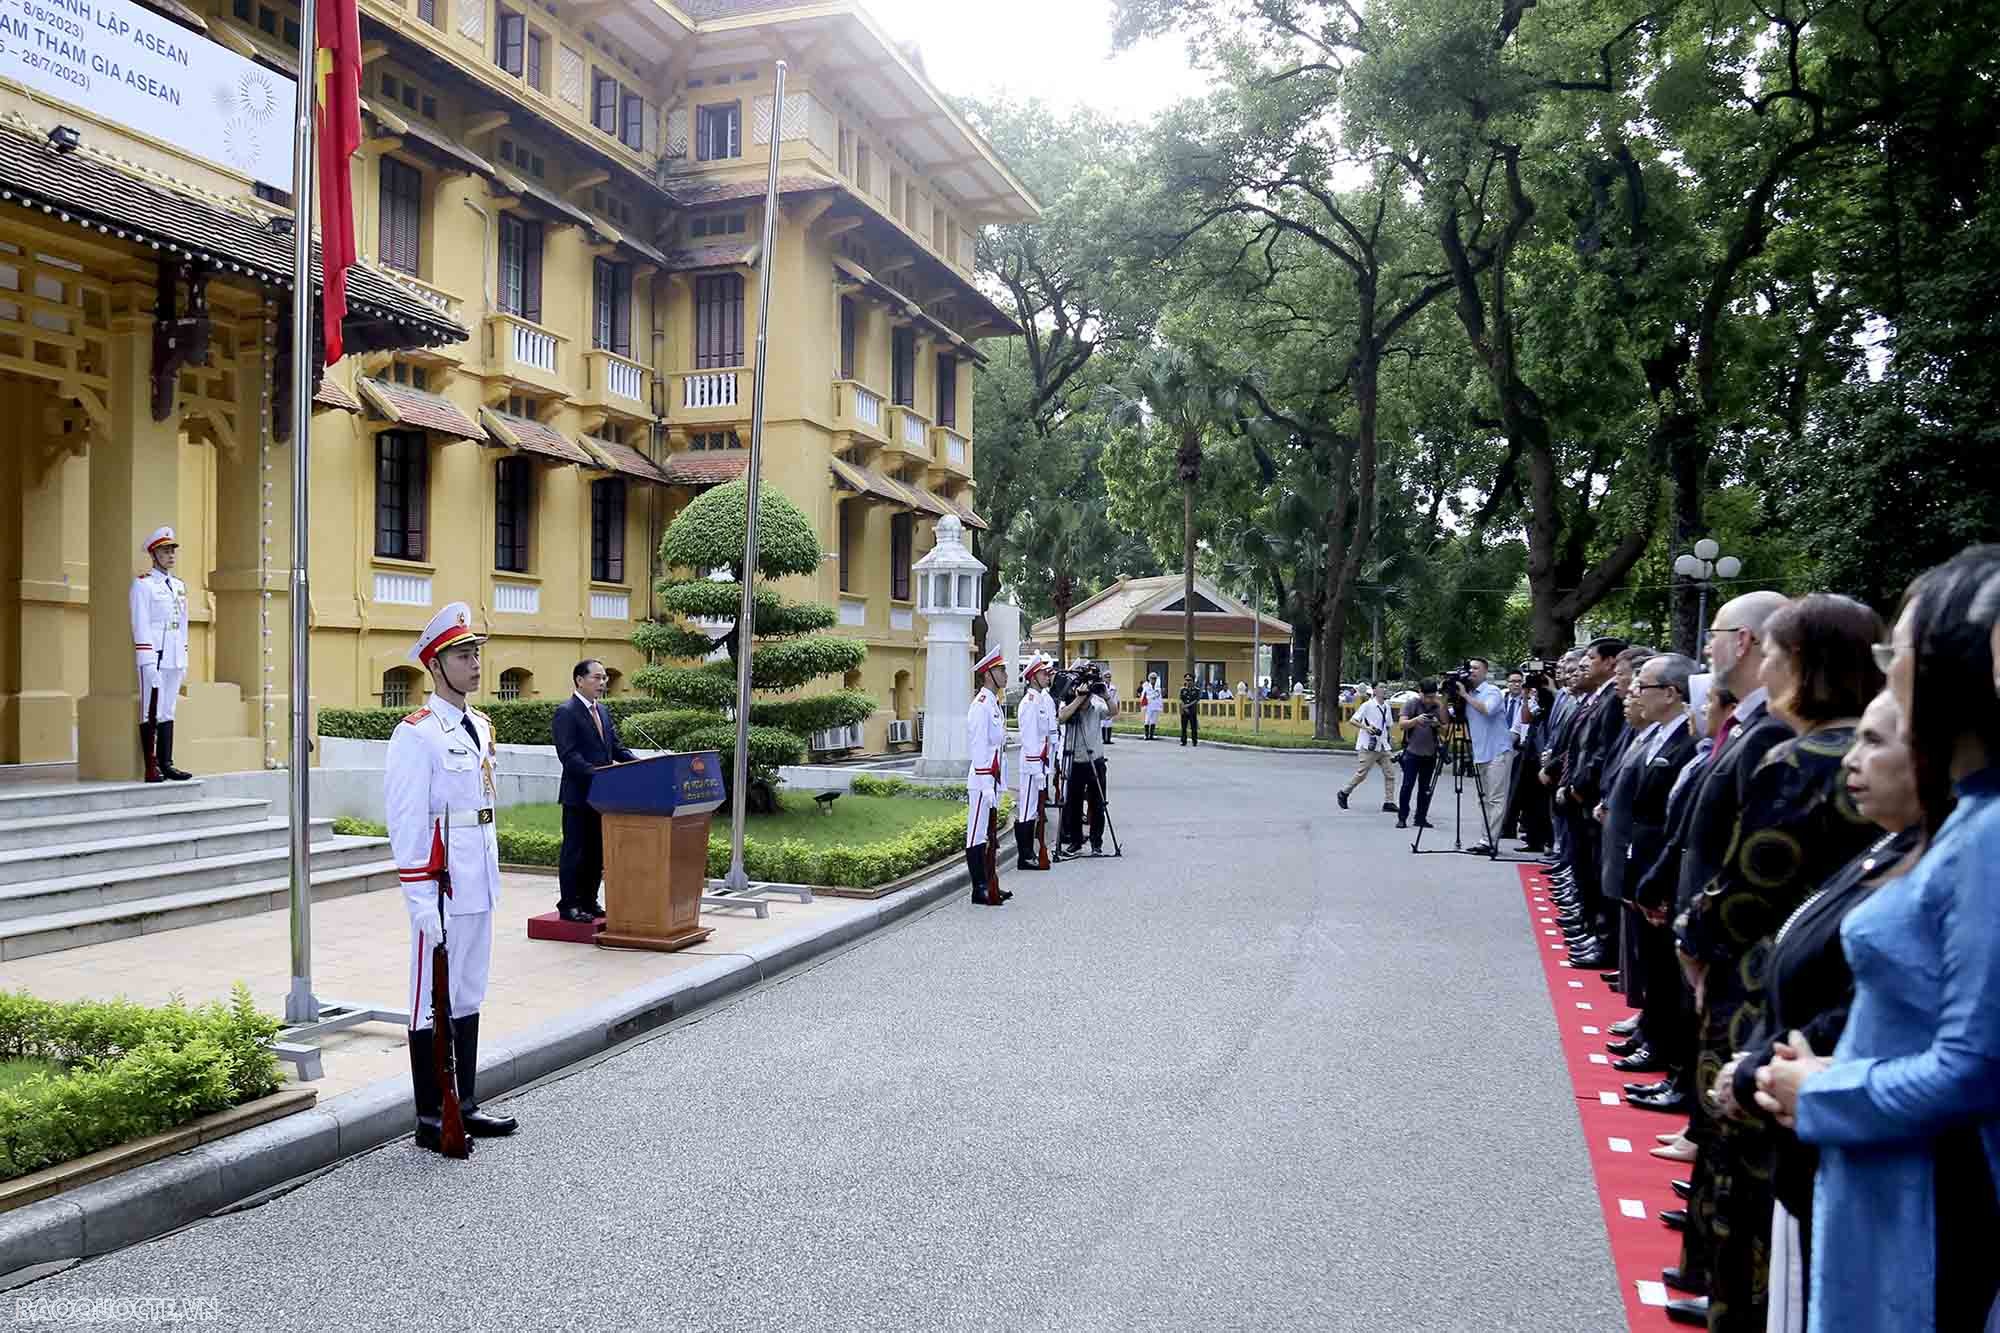 Foreign Minister chairs ASEAN flag-raising ceremony in Hanoi